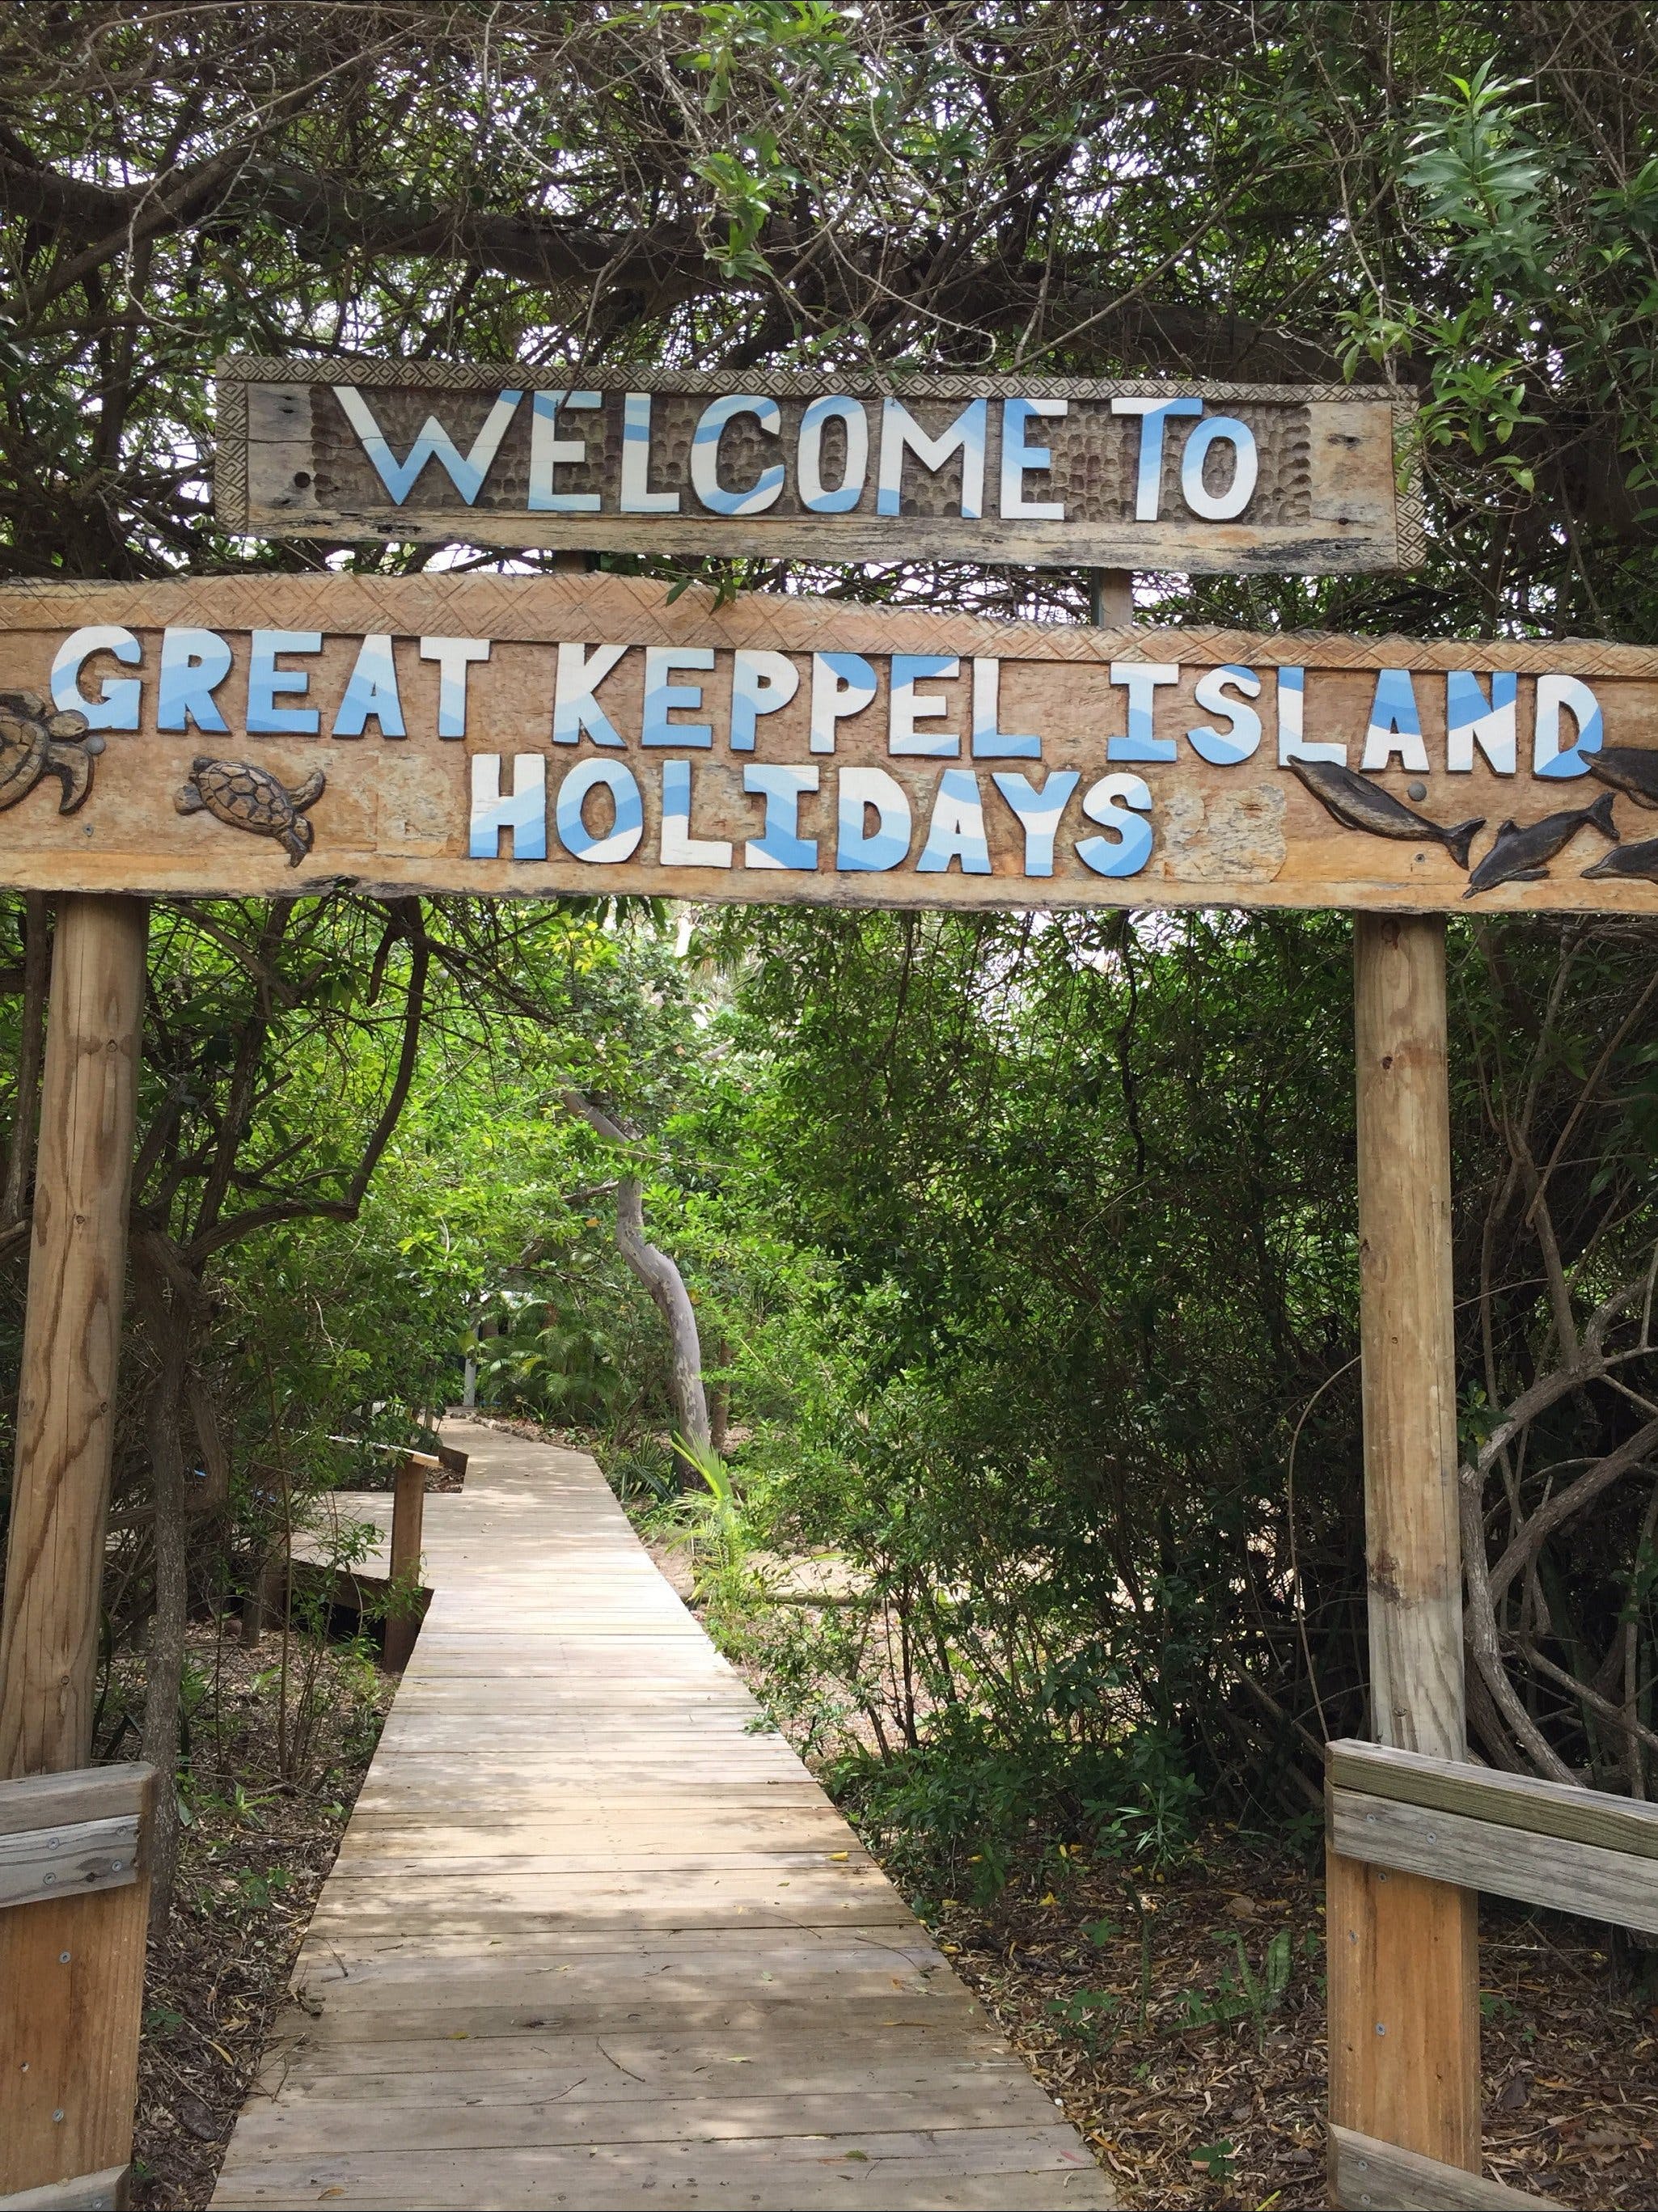 Great Keppel Island Holiday Village - Redcliffe Tourism